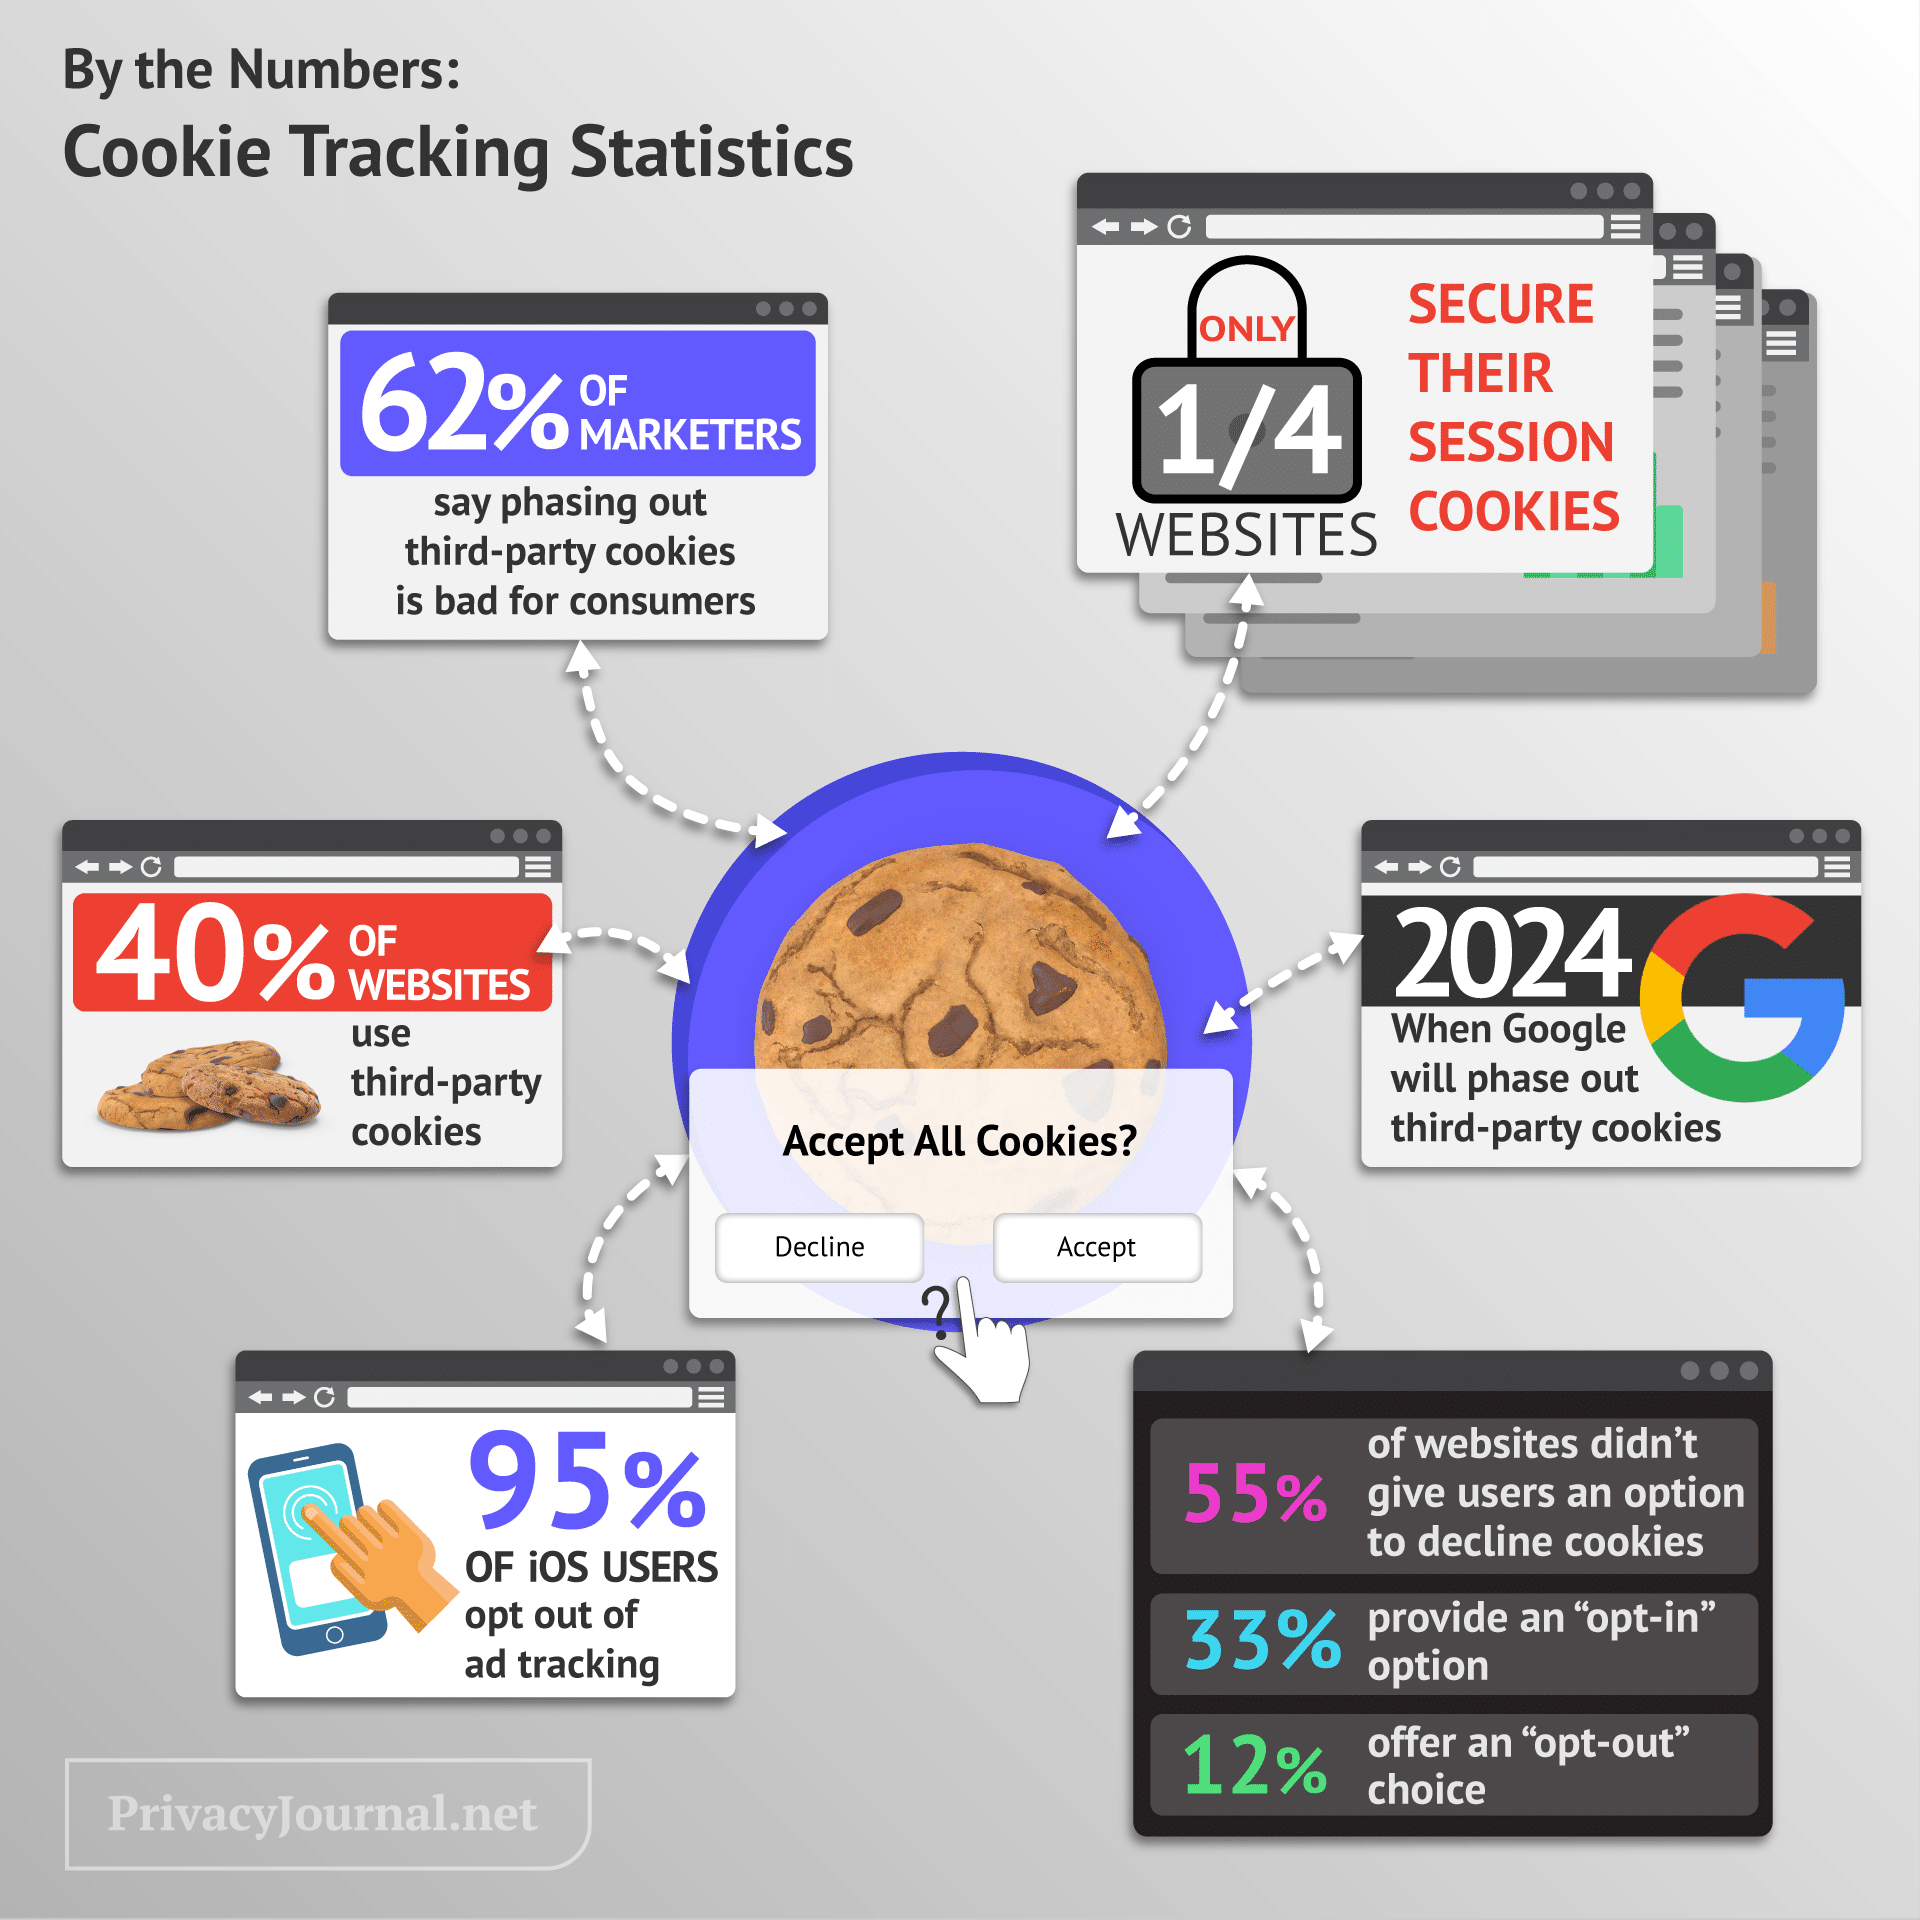 Cookie Tracking StatisticsByTheNumbers